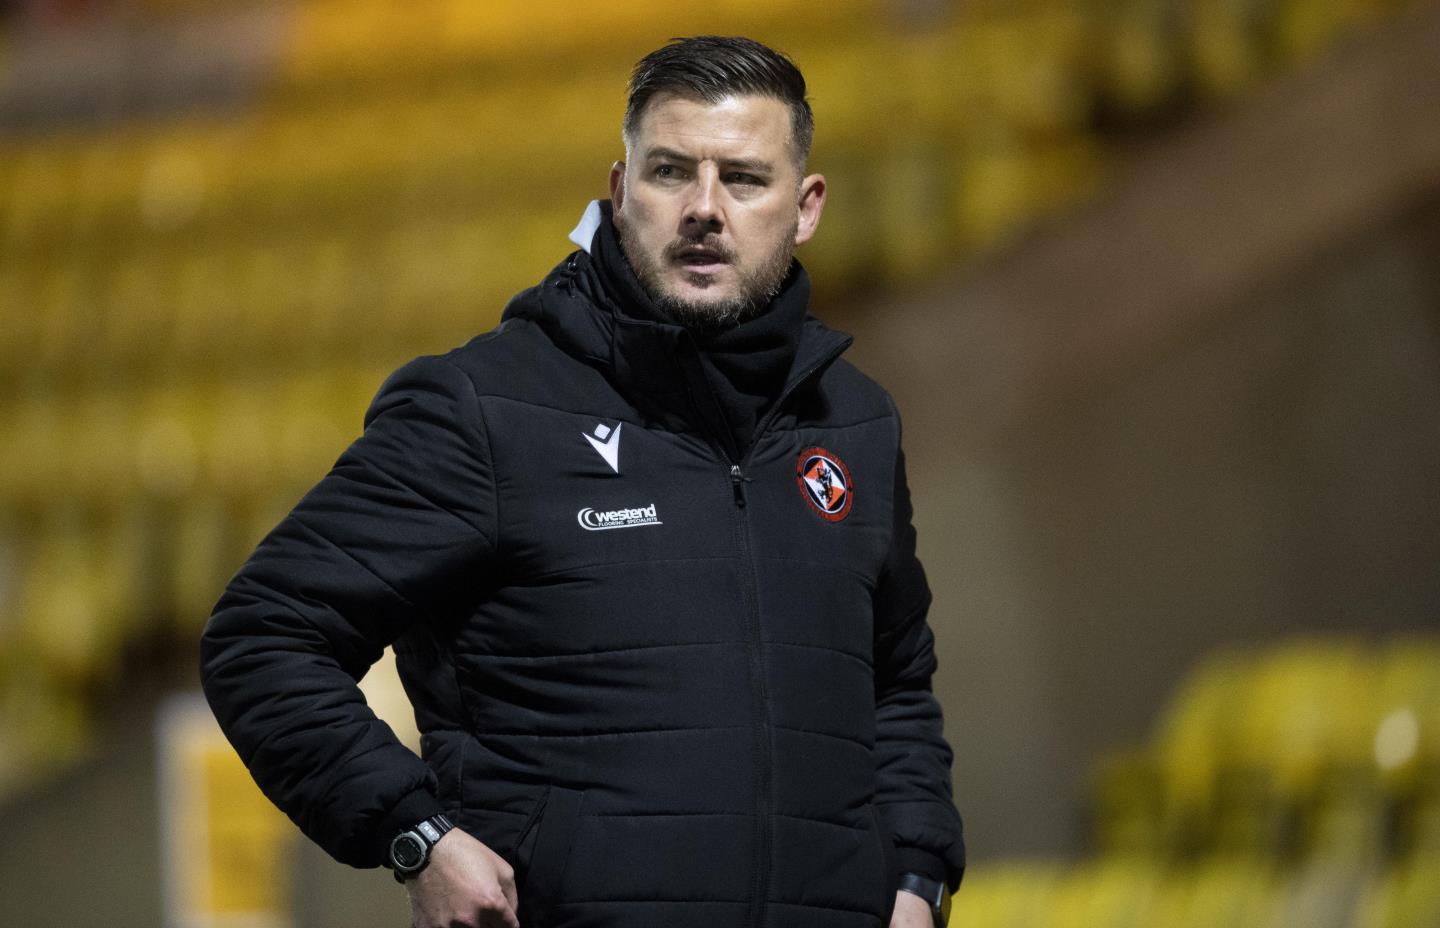 Tam Courts on the touchline during December match against Livingston.